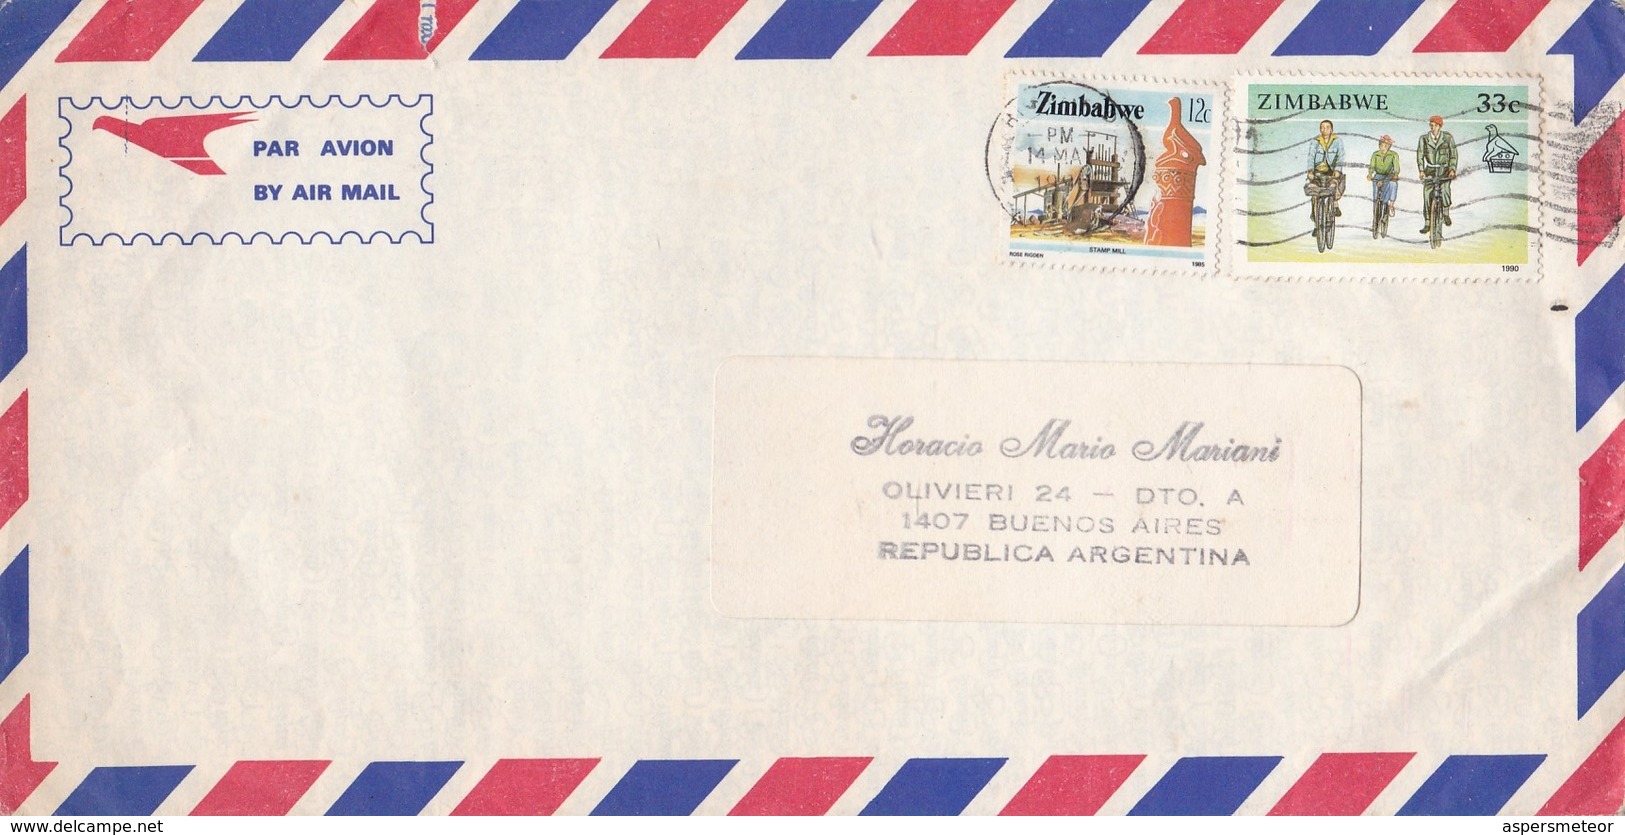 ZIMBABWE CIRCULATED ENVELOPE, HARARE TO BUENOS AIRES, ARGENTINA IN 1998 BY AIRMAIL -LILHU - Zimbabwe (1980-...)